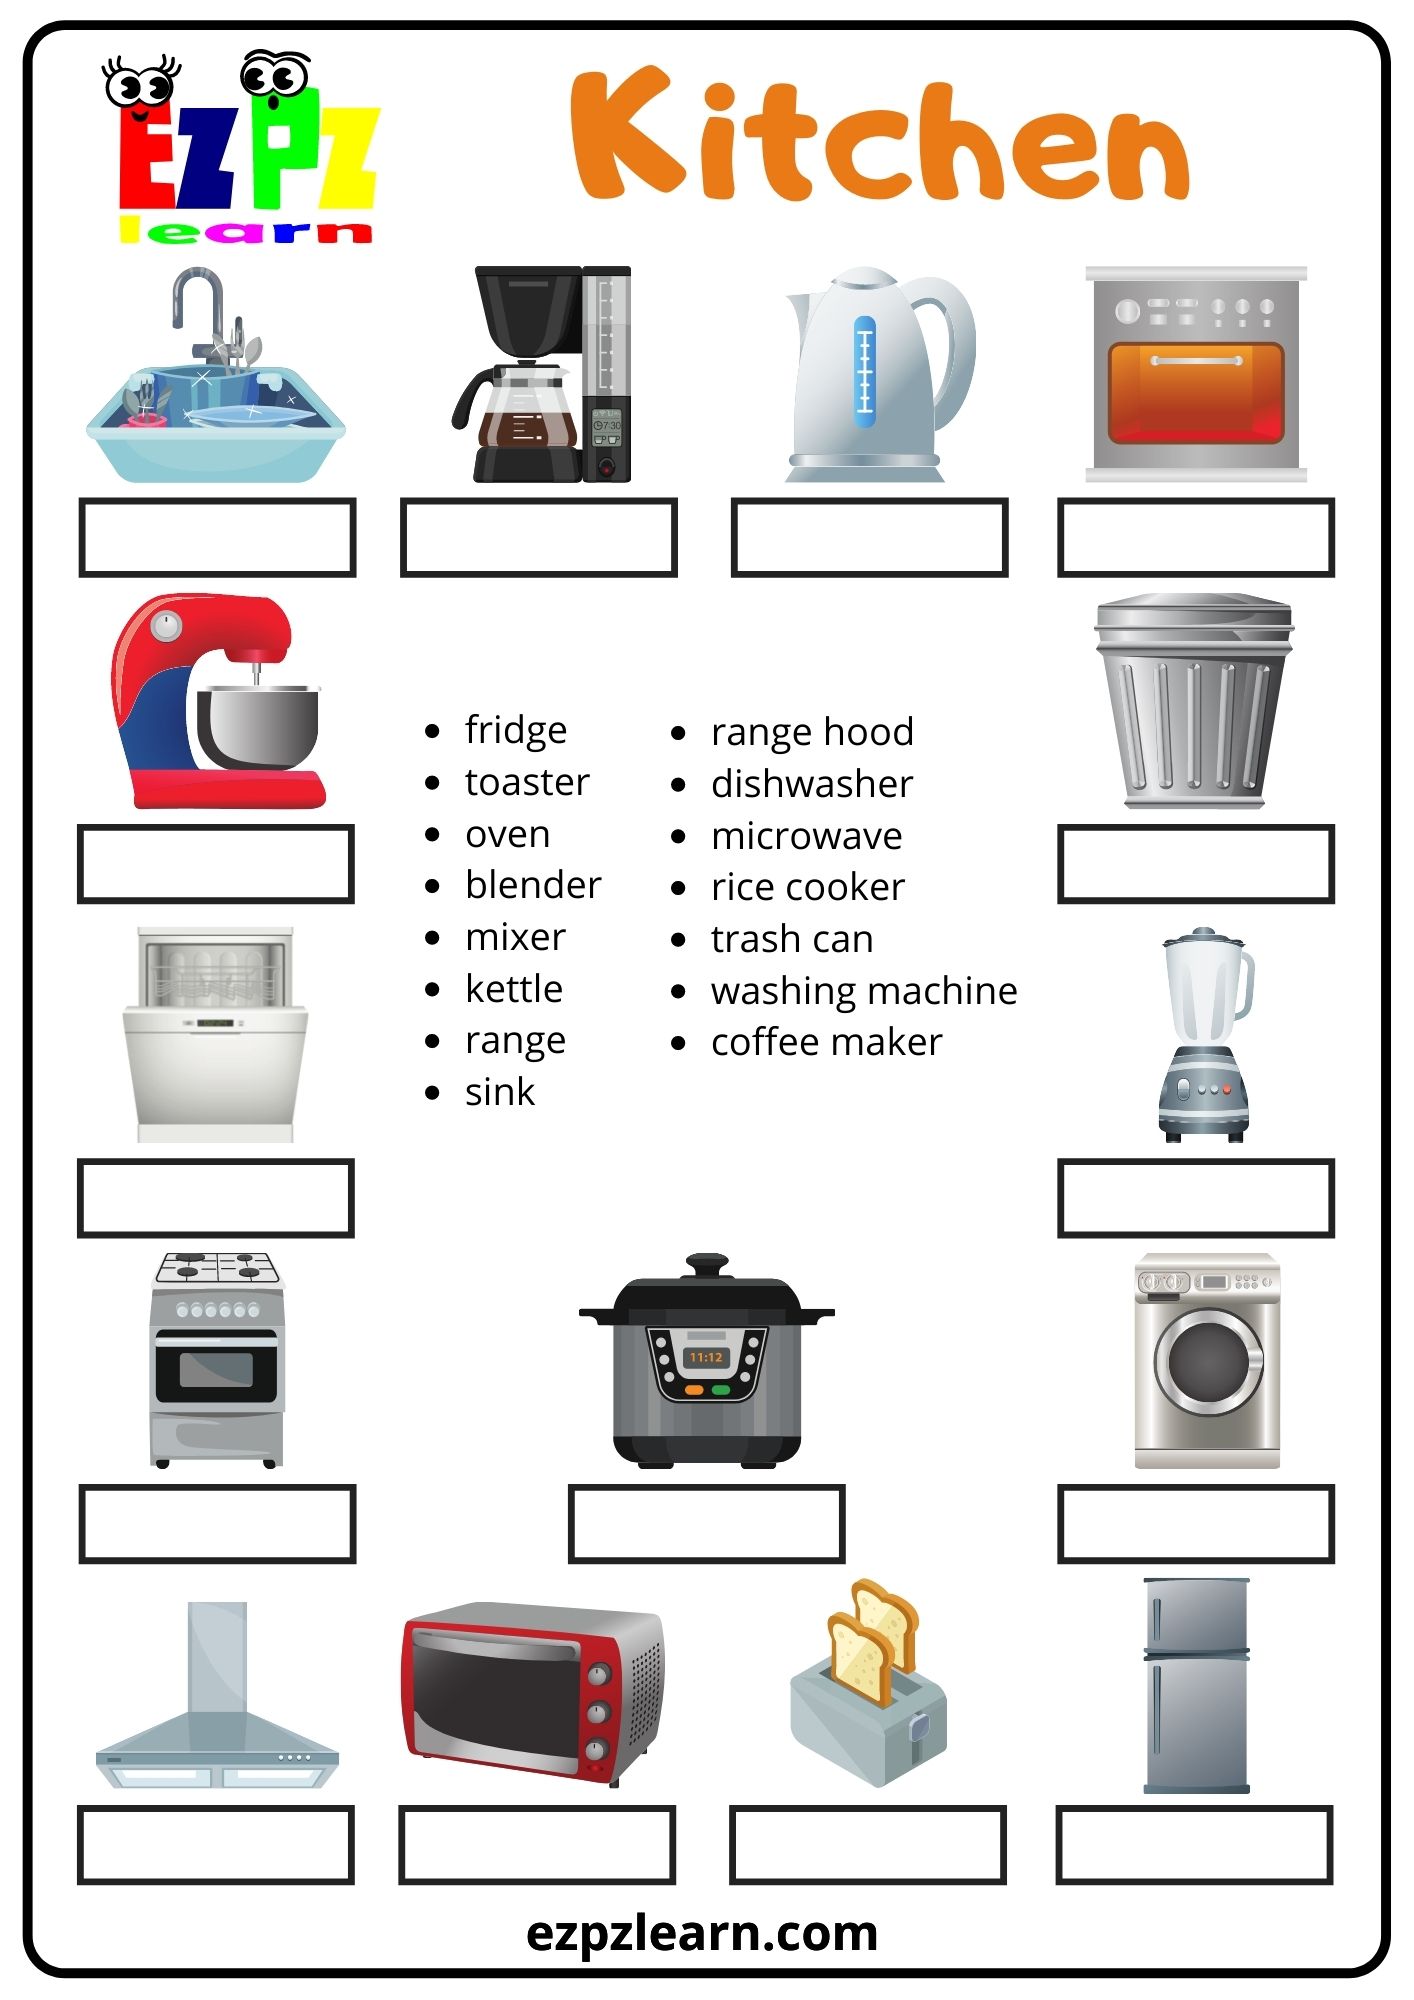 Kitchen Vocabulary, Kitchen Appliances Names Cooker Hood Every